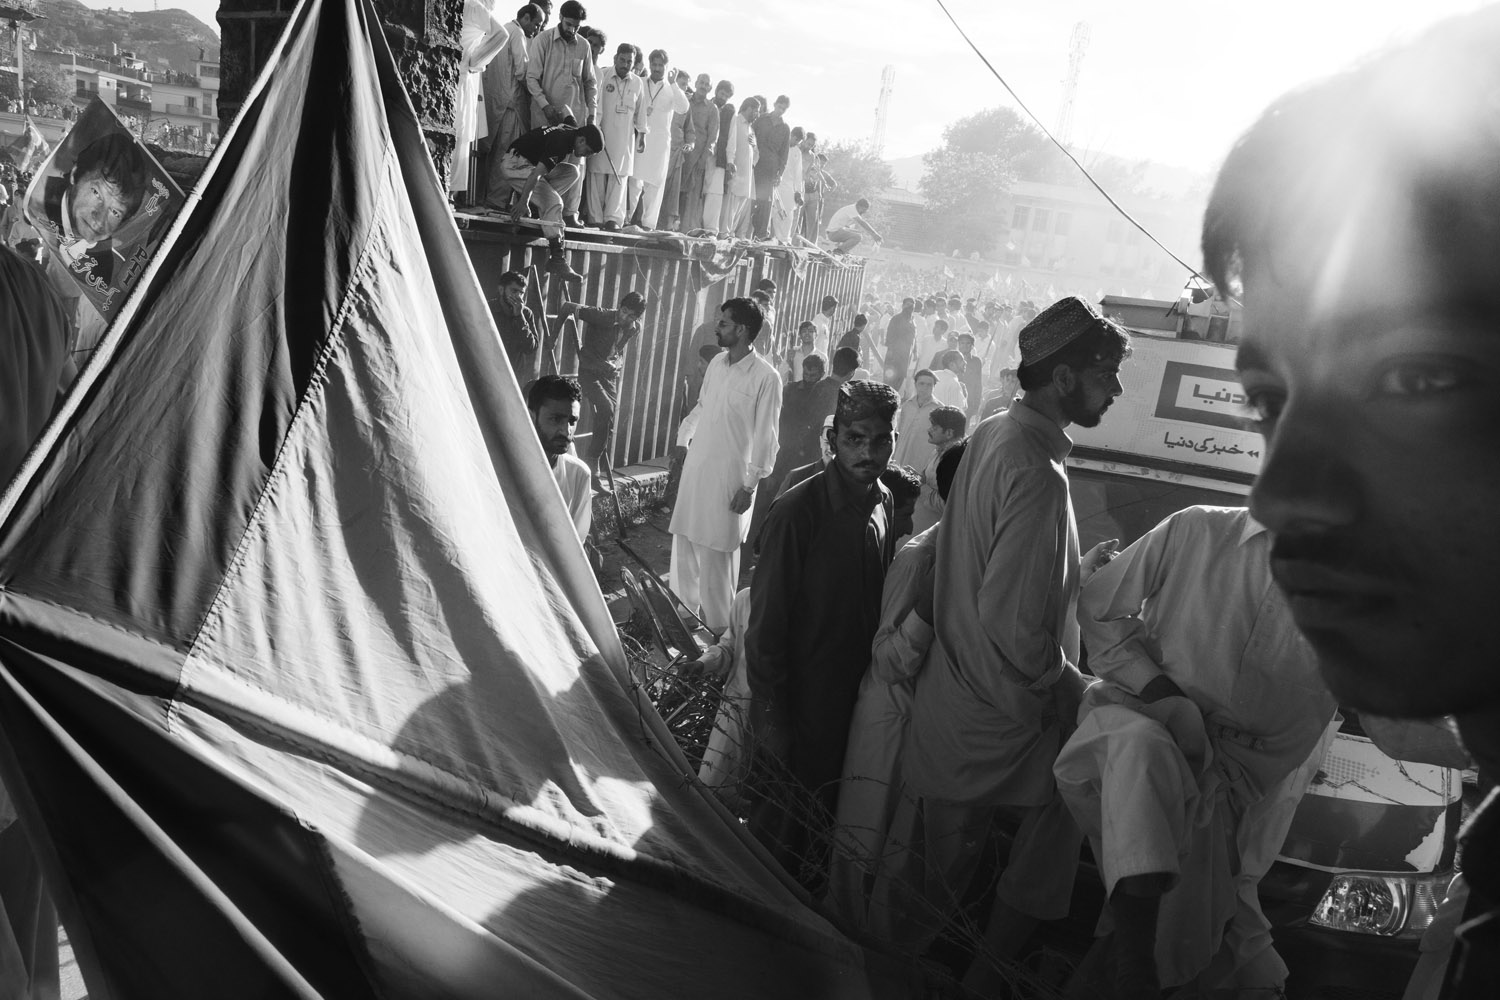 May 3, 2013. People cross security lines after PTI chairman Imran Khan left an election rally in Abbotabad.